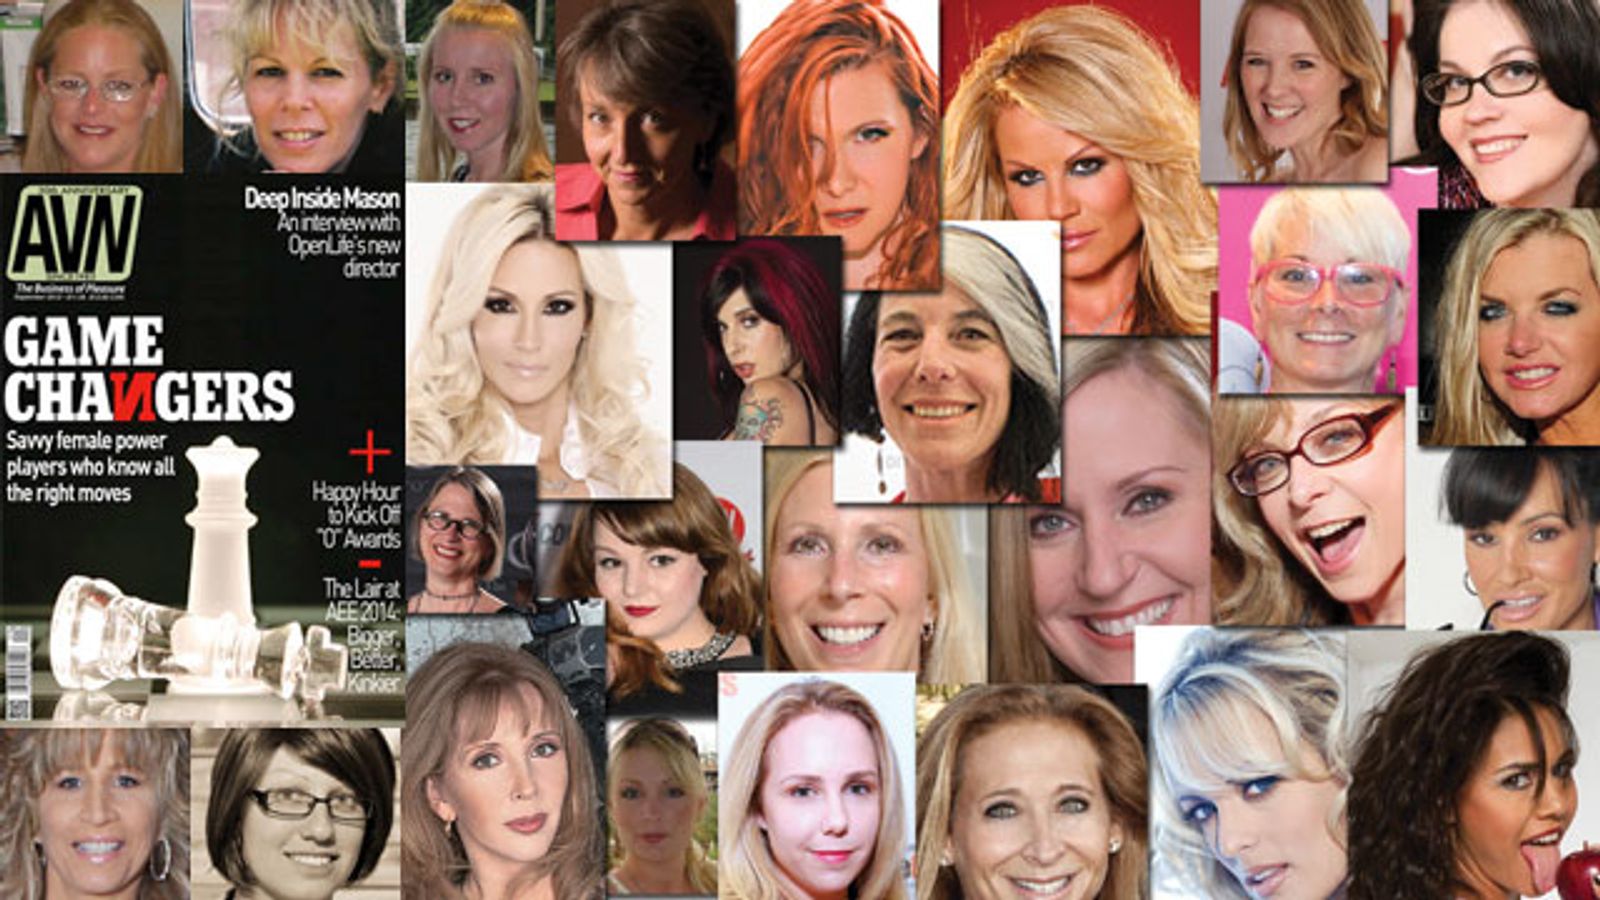 Game Changers: 30 Women Power Players in the Adult Industry